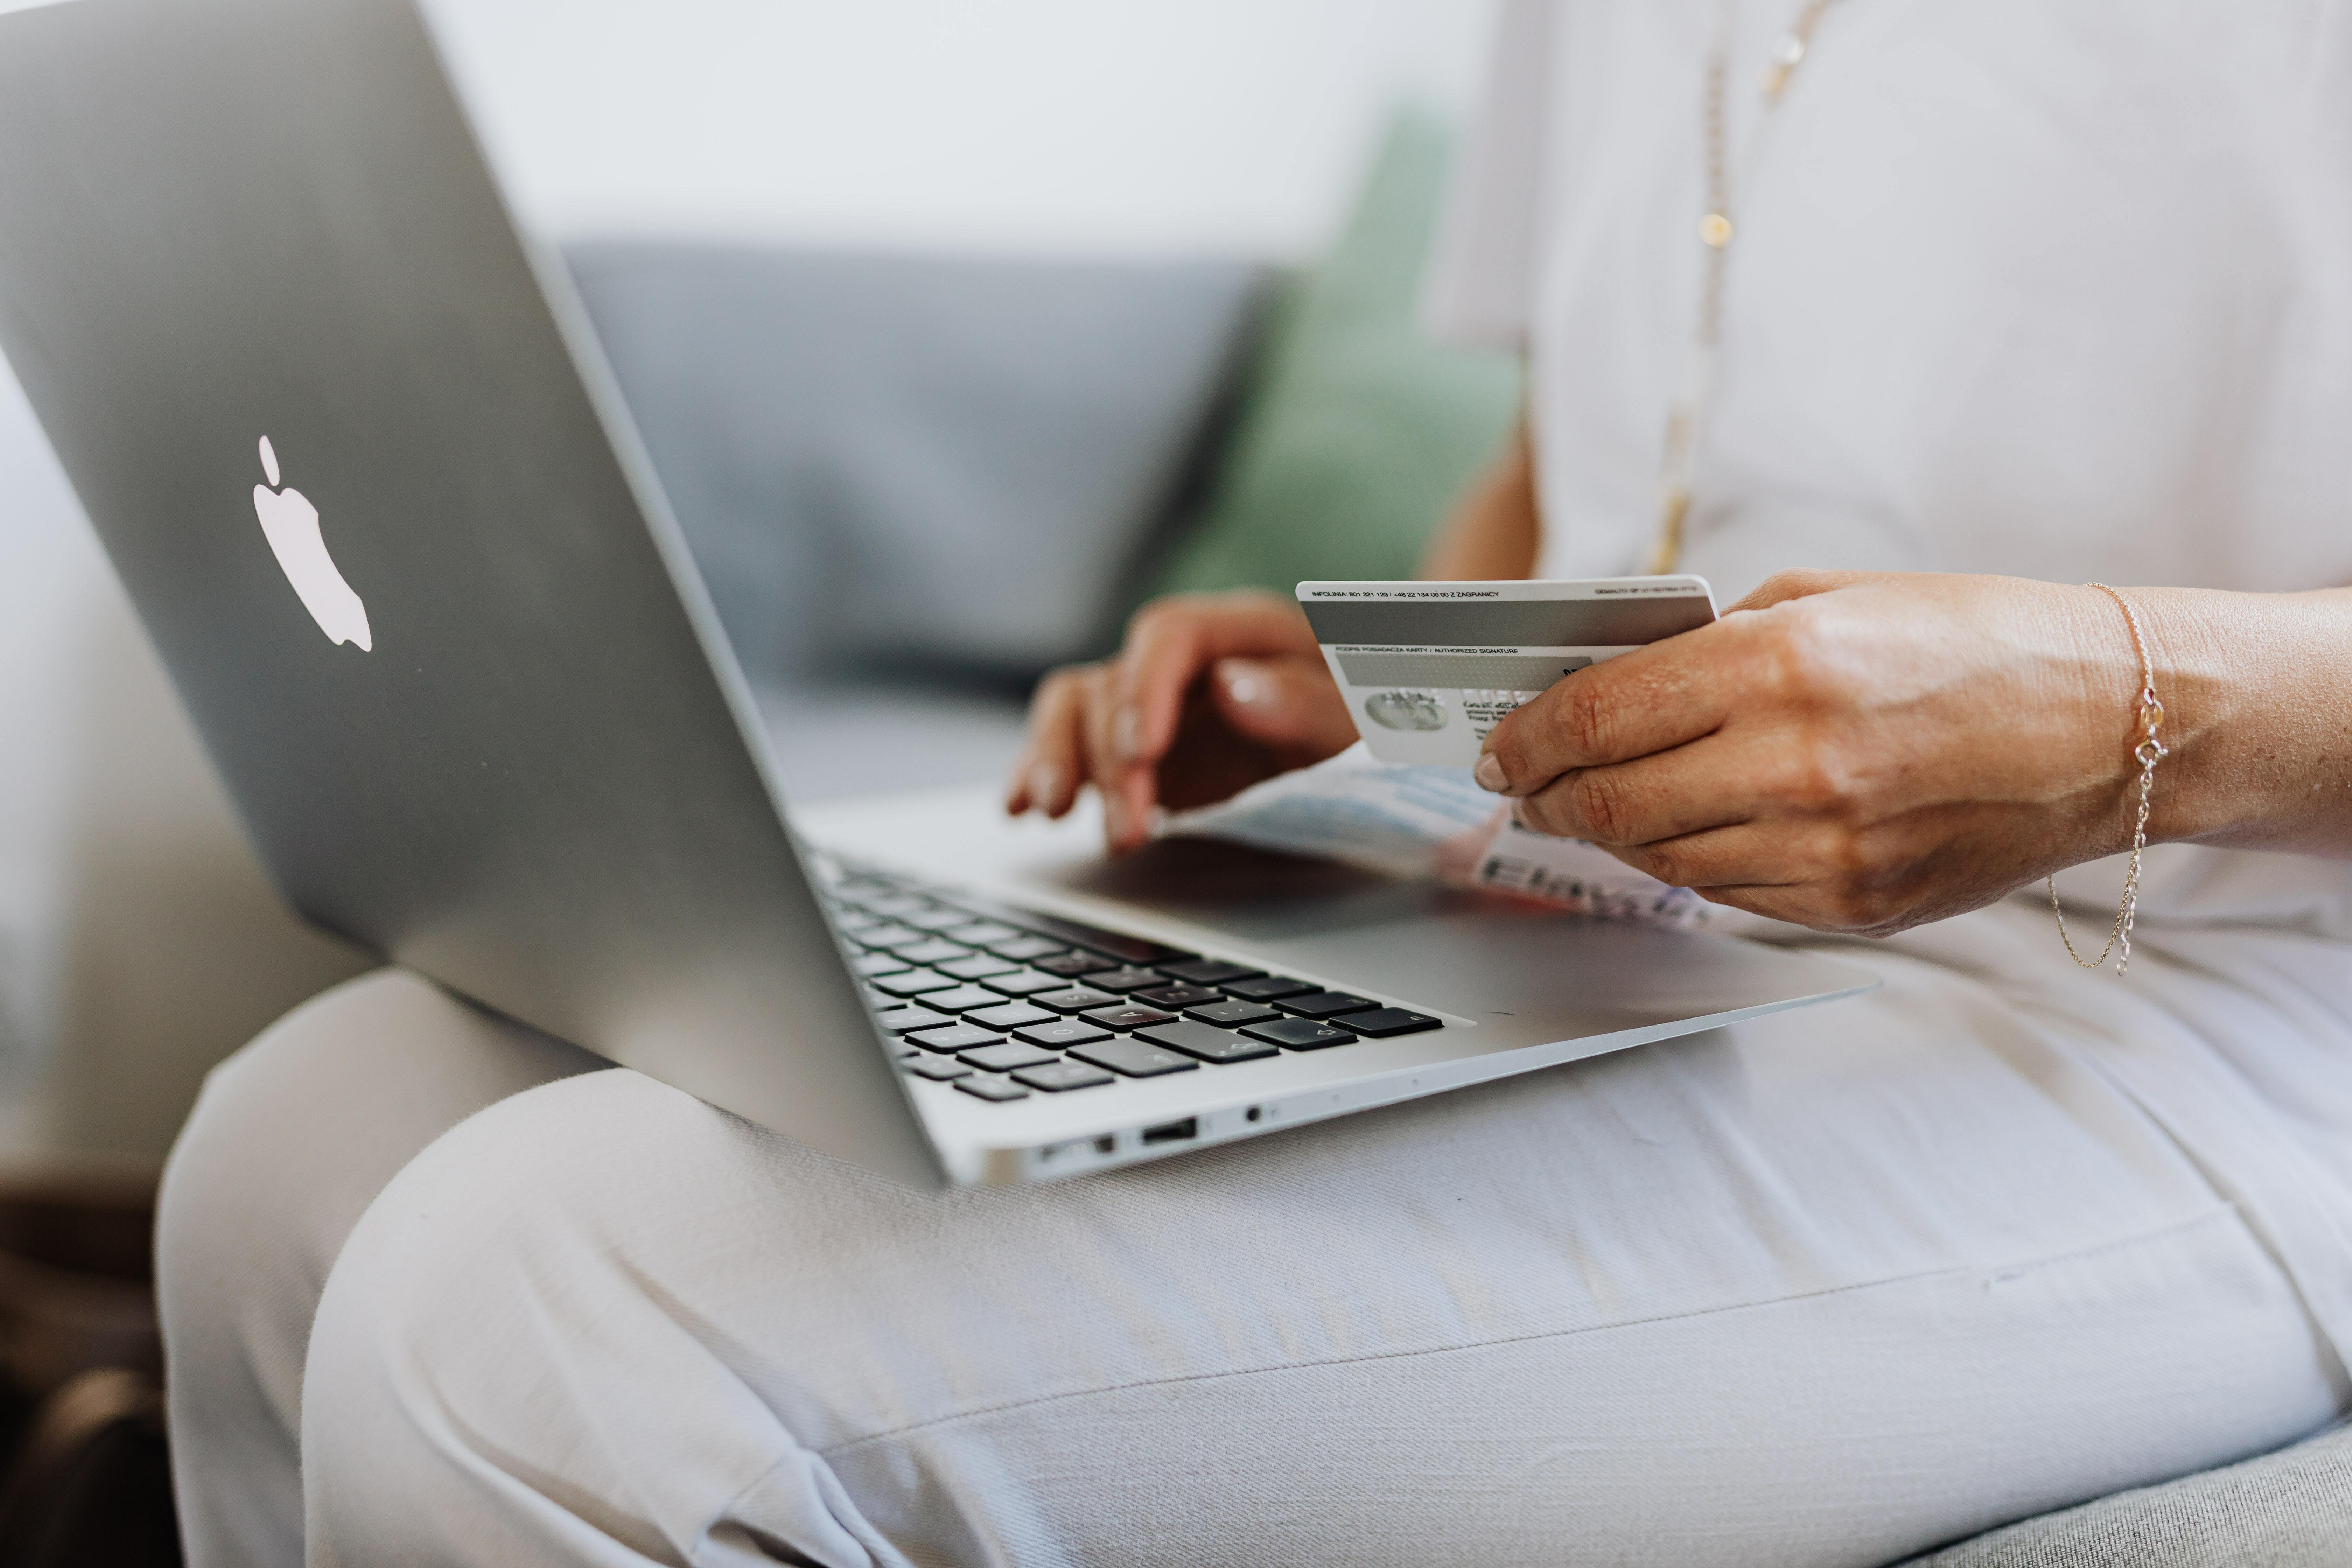 woman with a laptop in her lap and holding a credit card, shopping online